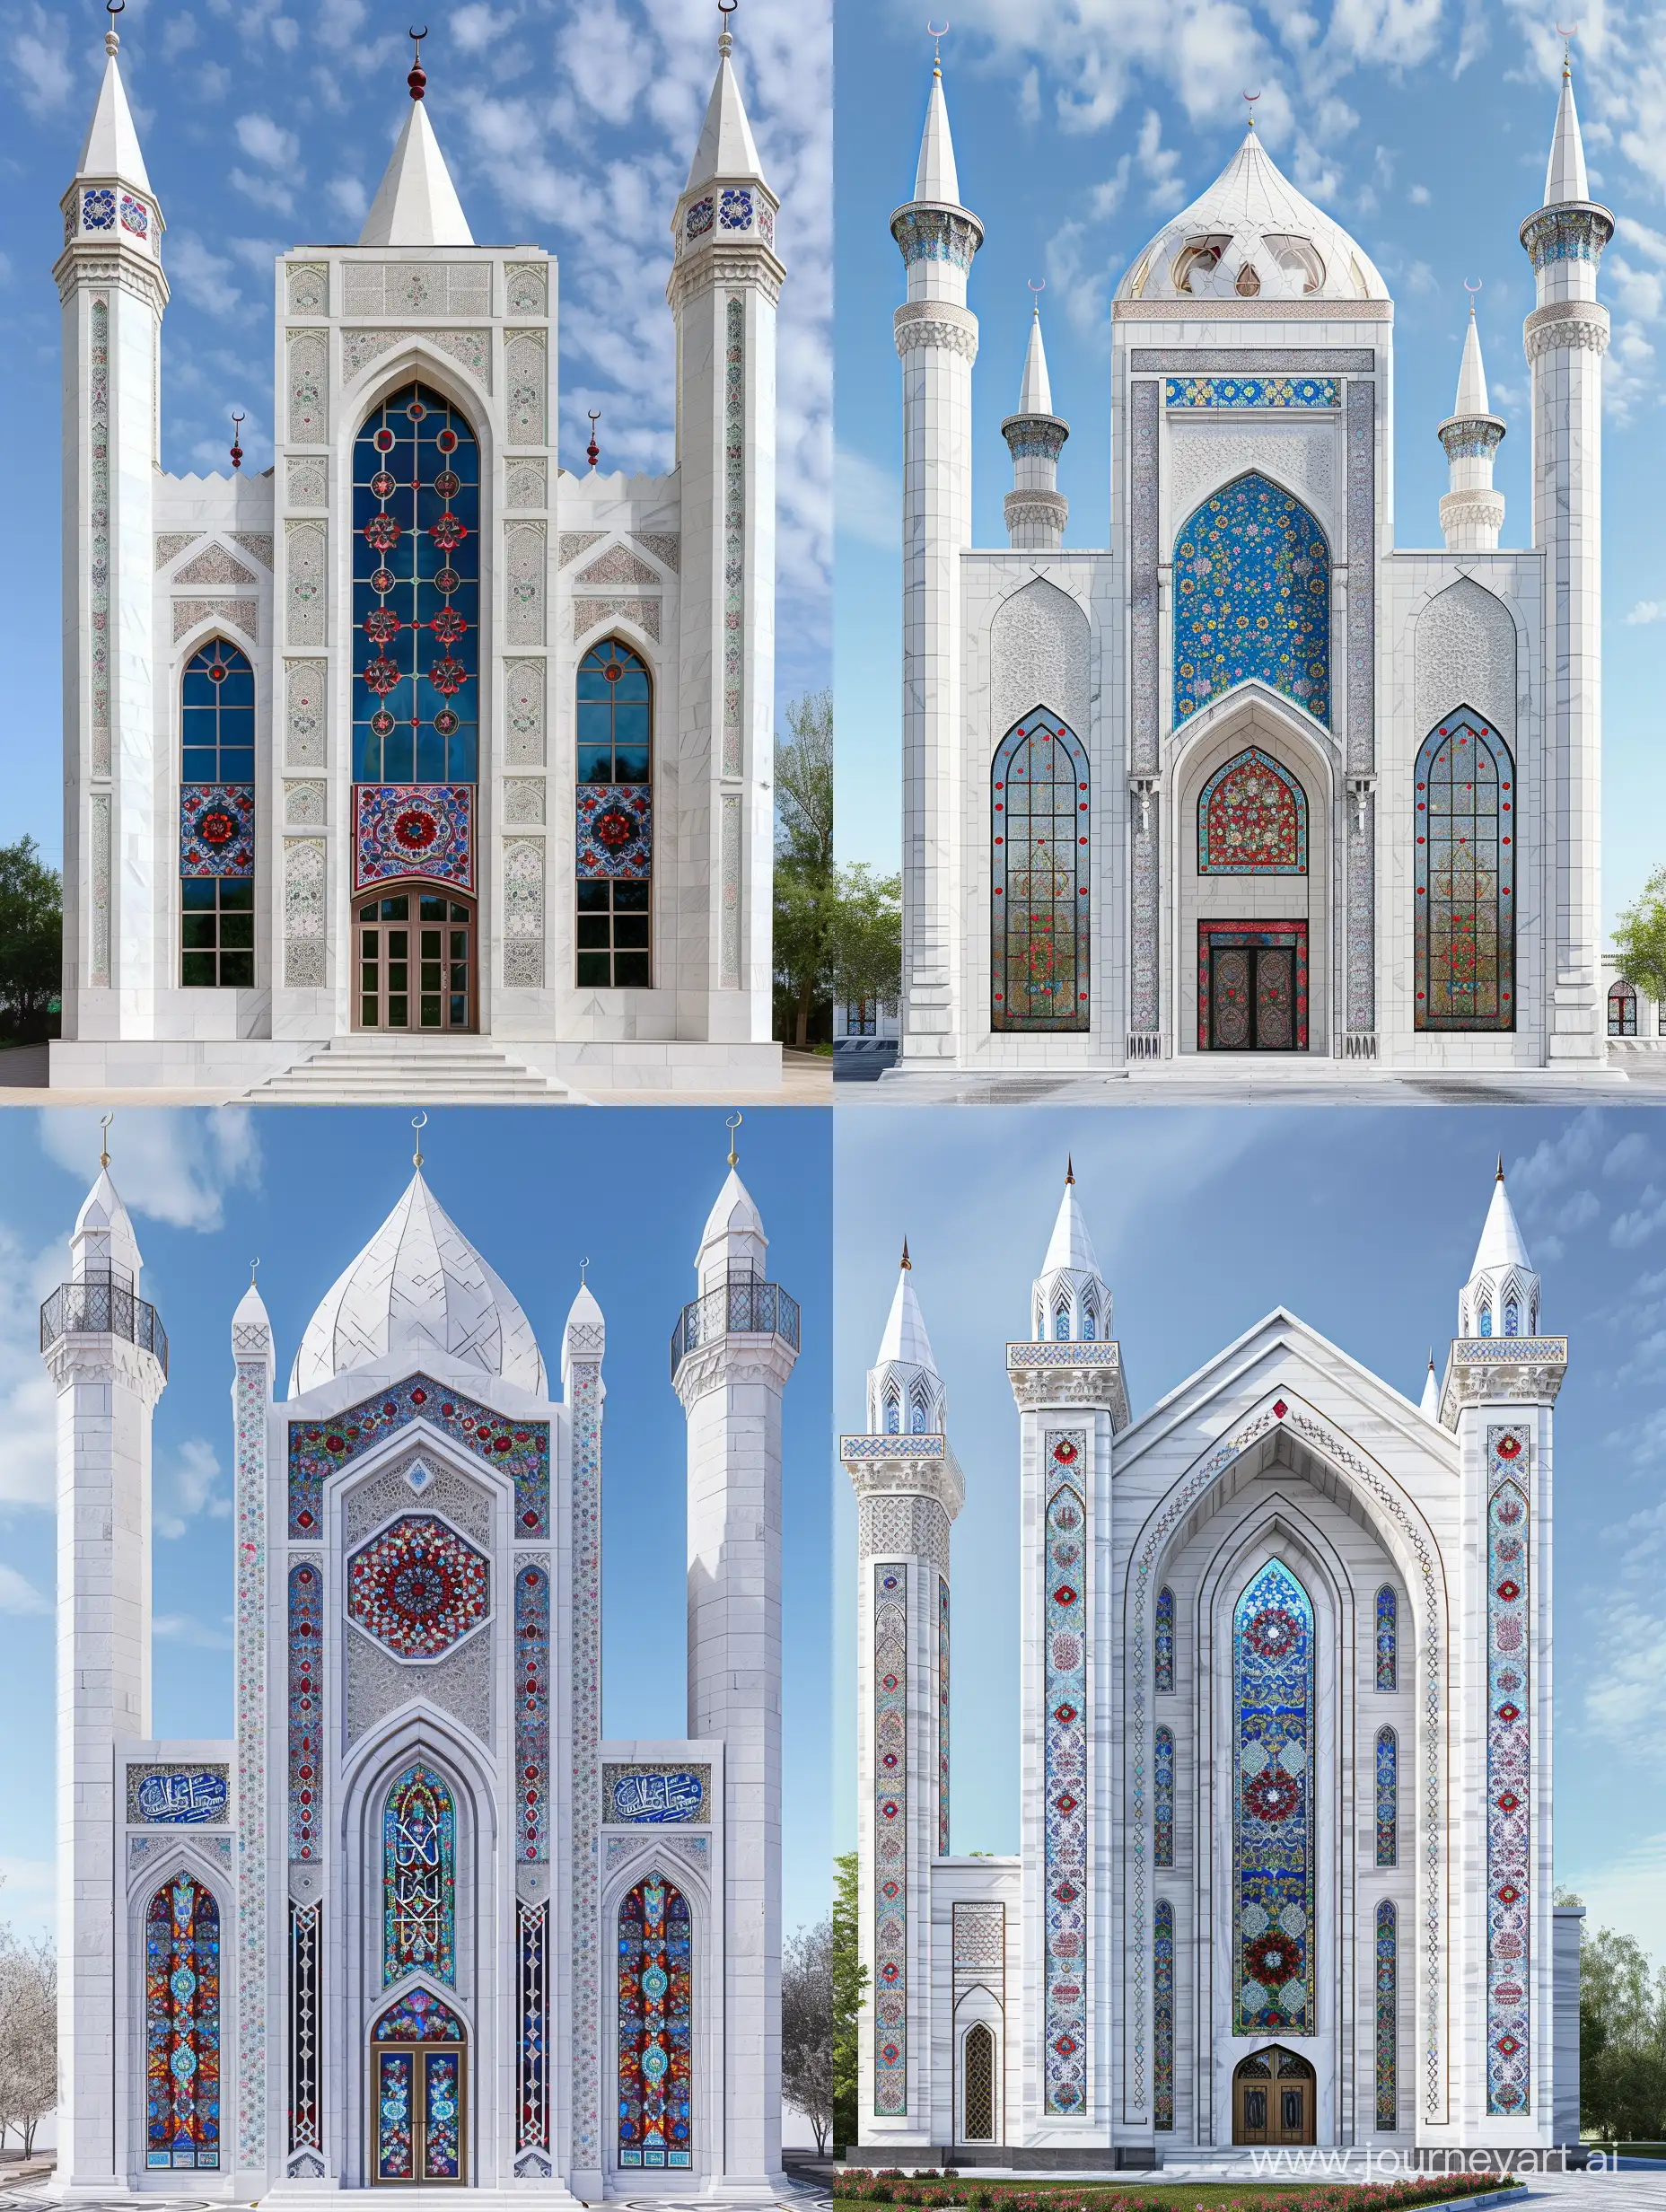 an Uzbekistan style mosque, White marbled exterior, tall iwan, stained glass windows, red blue persian floral motifs on spandrels, red blue gems and rubies embedded on arabesque ornaments, thin spires, full view, front view